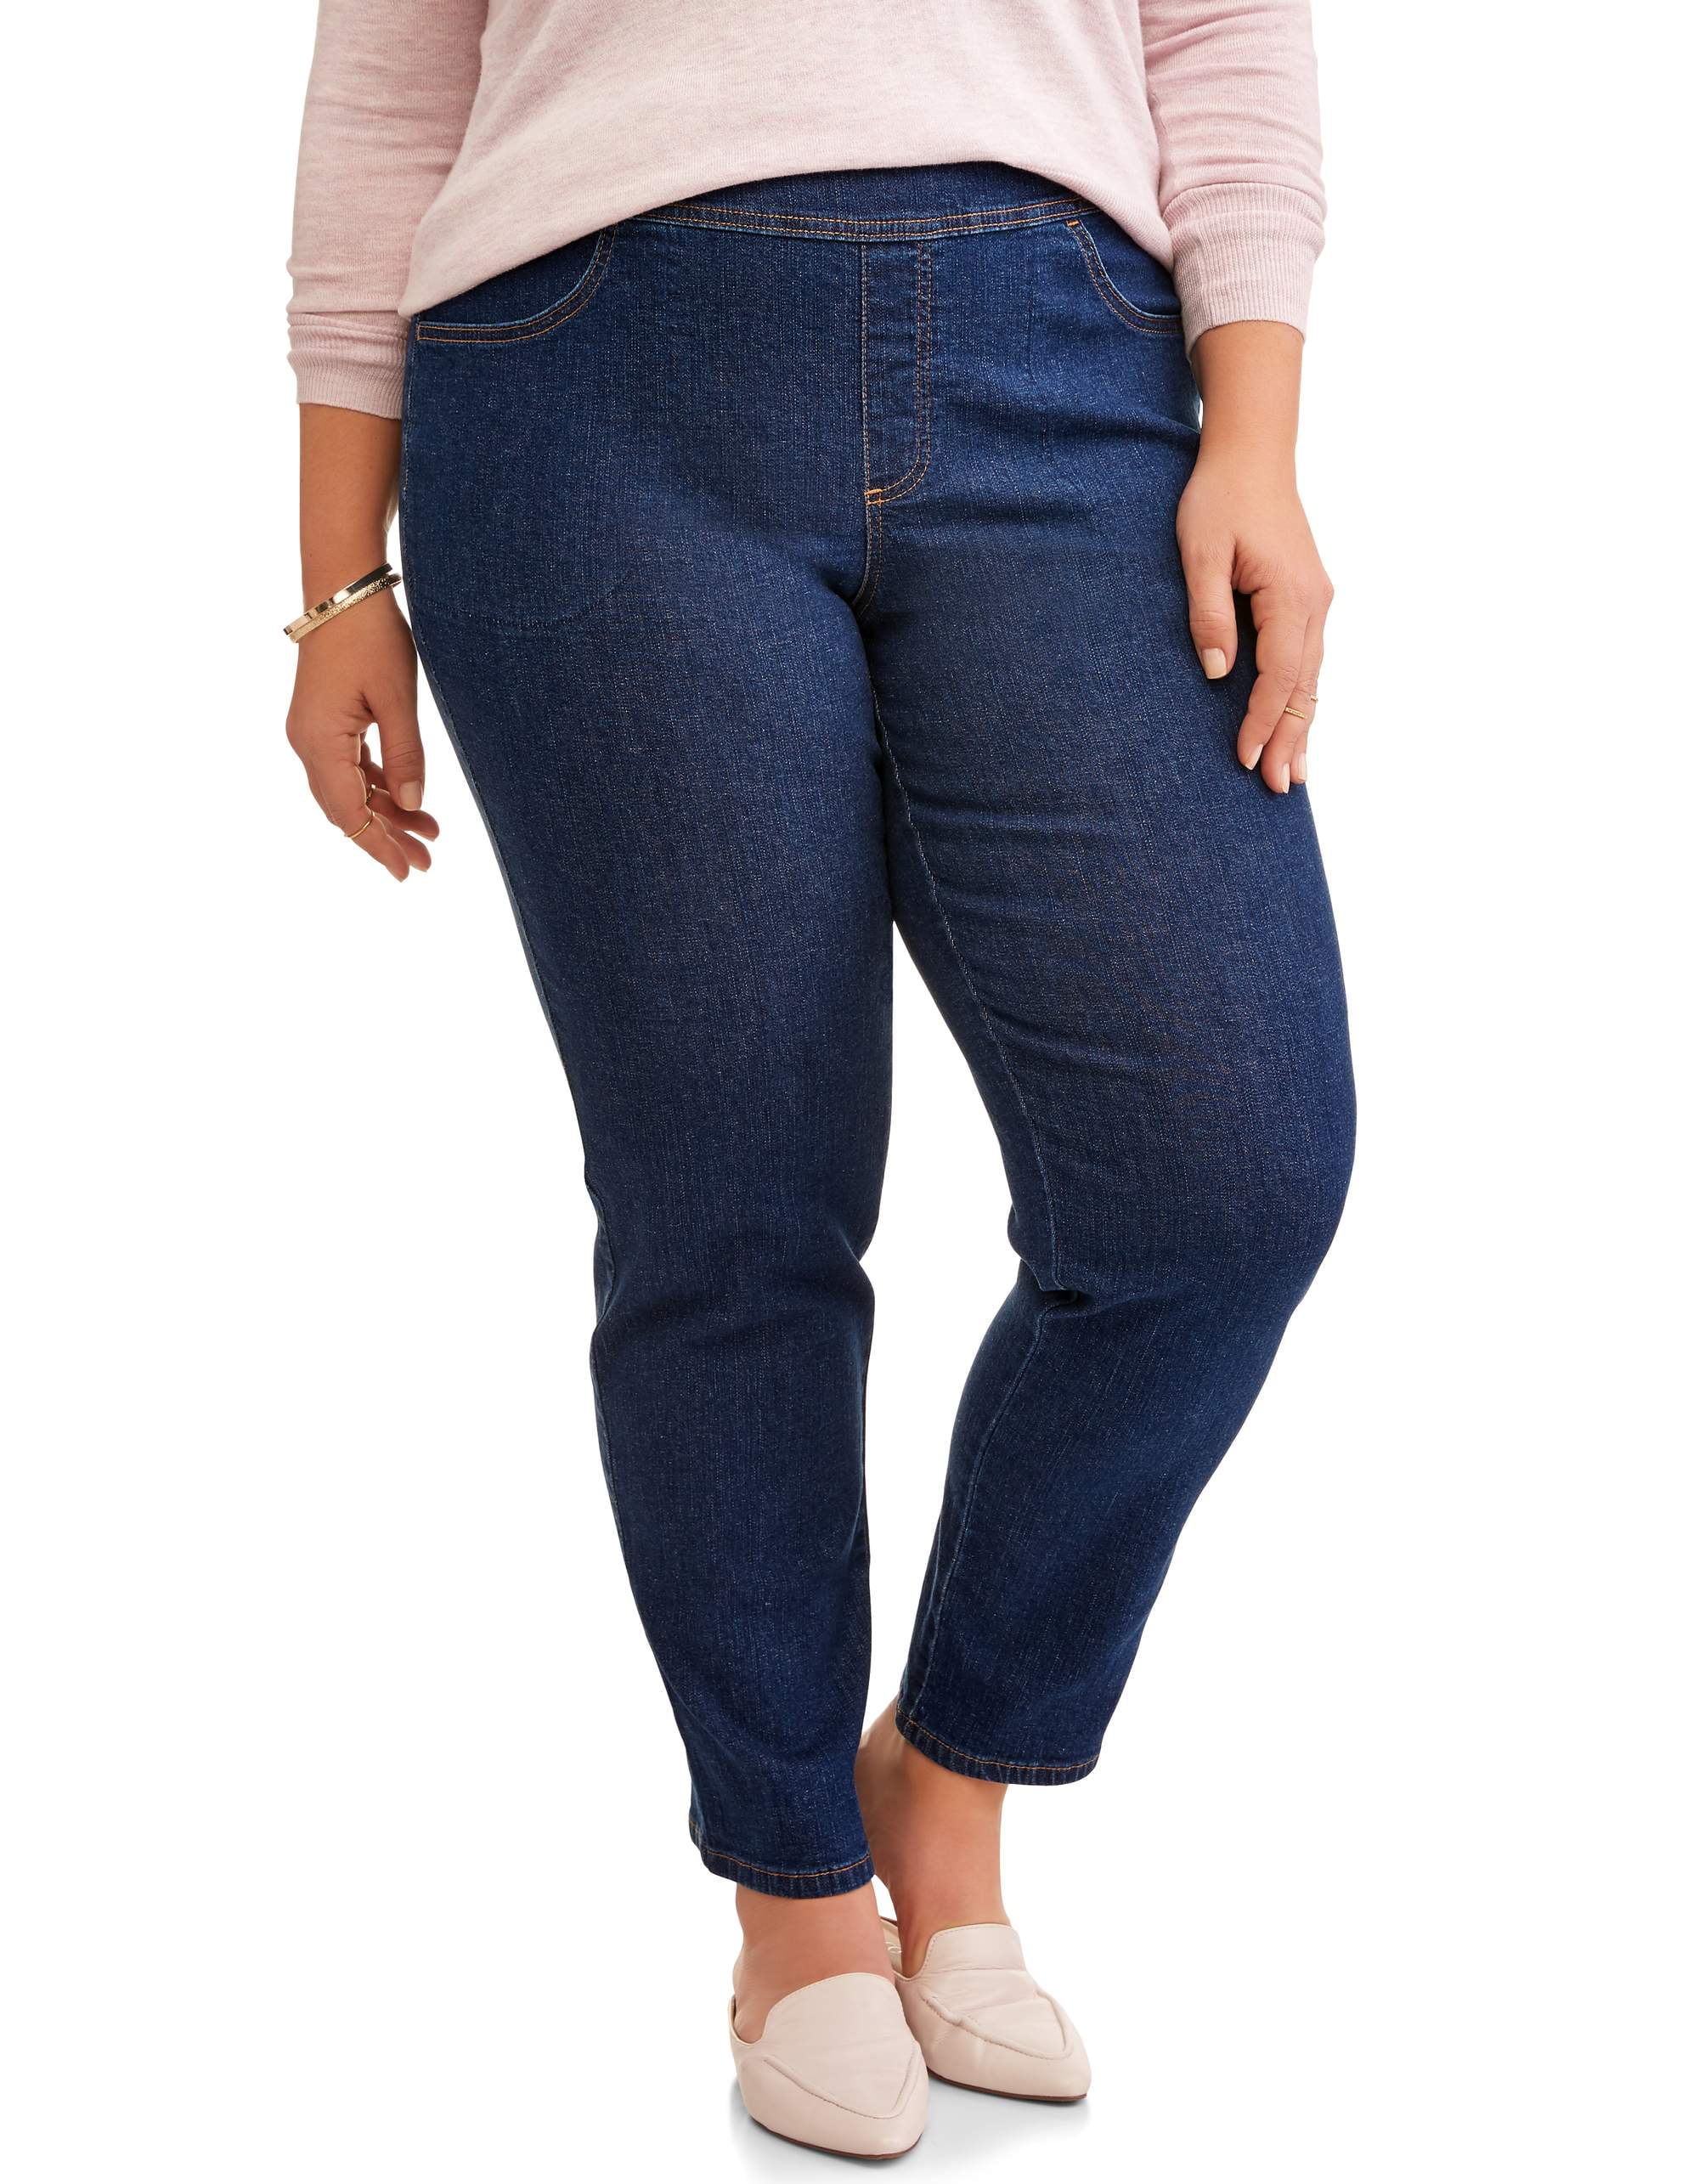 Terra & Sky Women's Plus Size 2 Pocket Pull On Pant, Also in Petite 